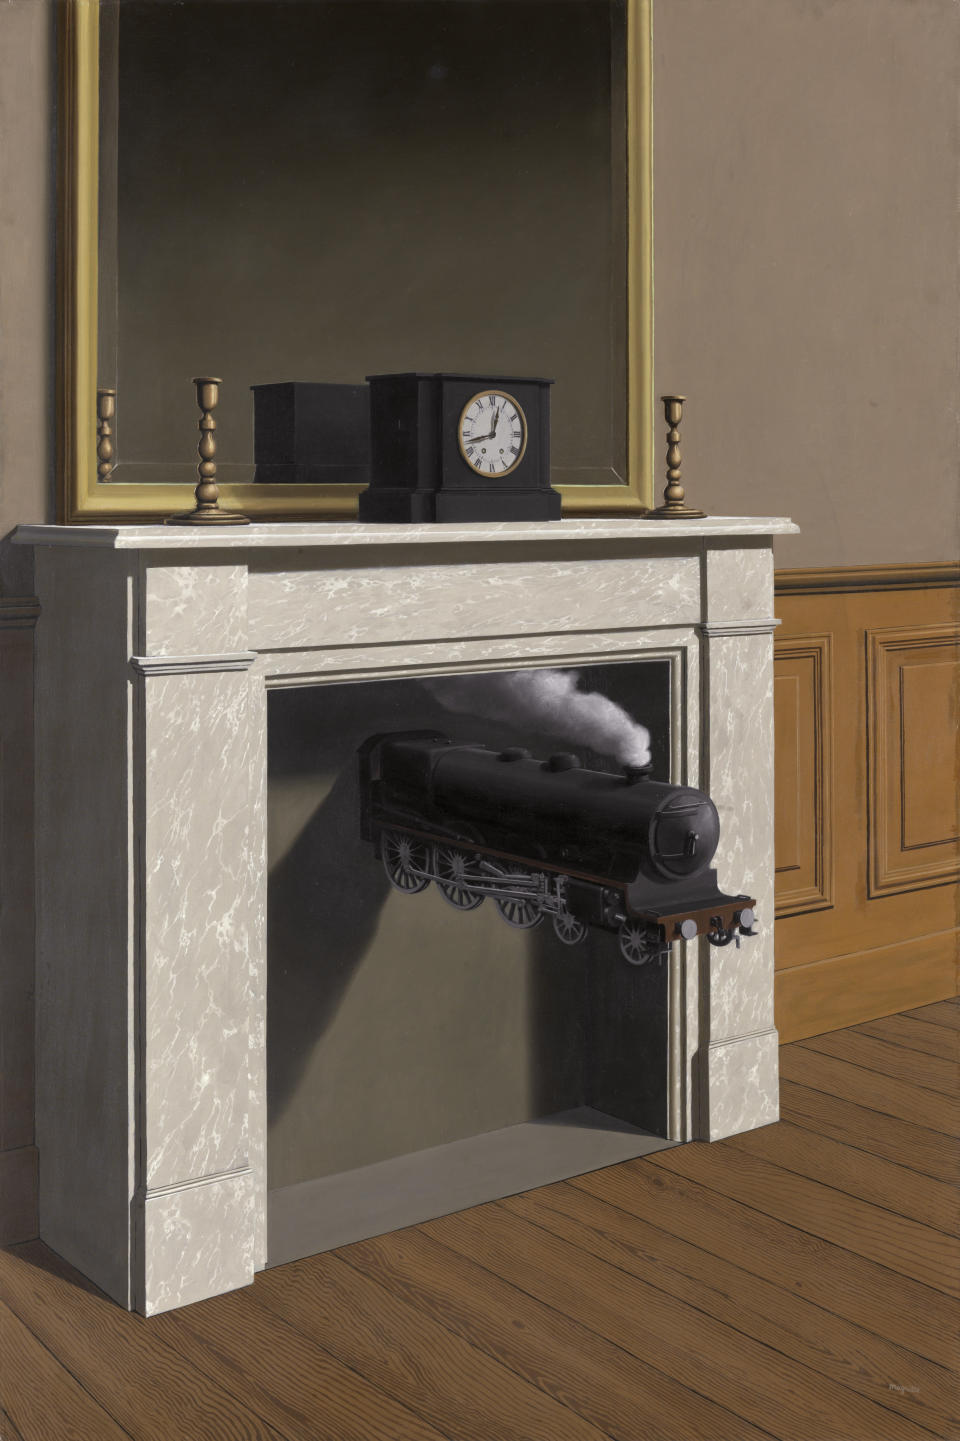 “Time Transfixed,” 1938, by Rene Magritte - Credit: Tate Modern/Courtesy